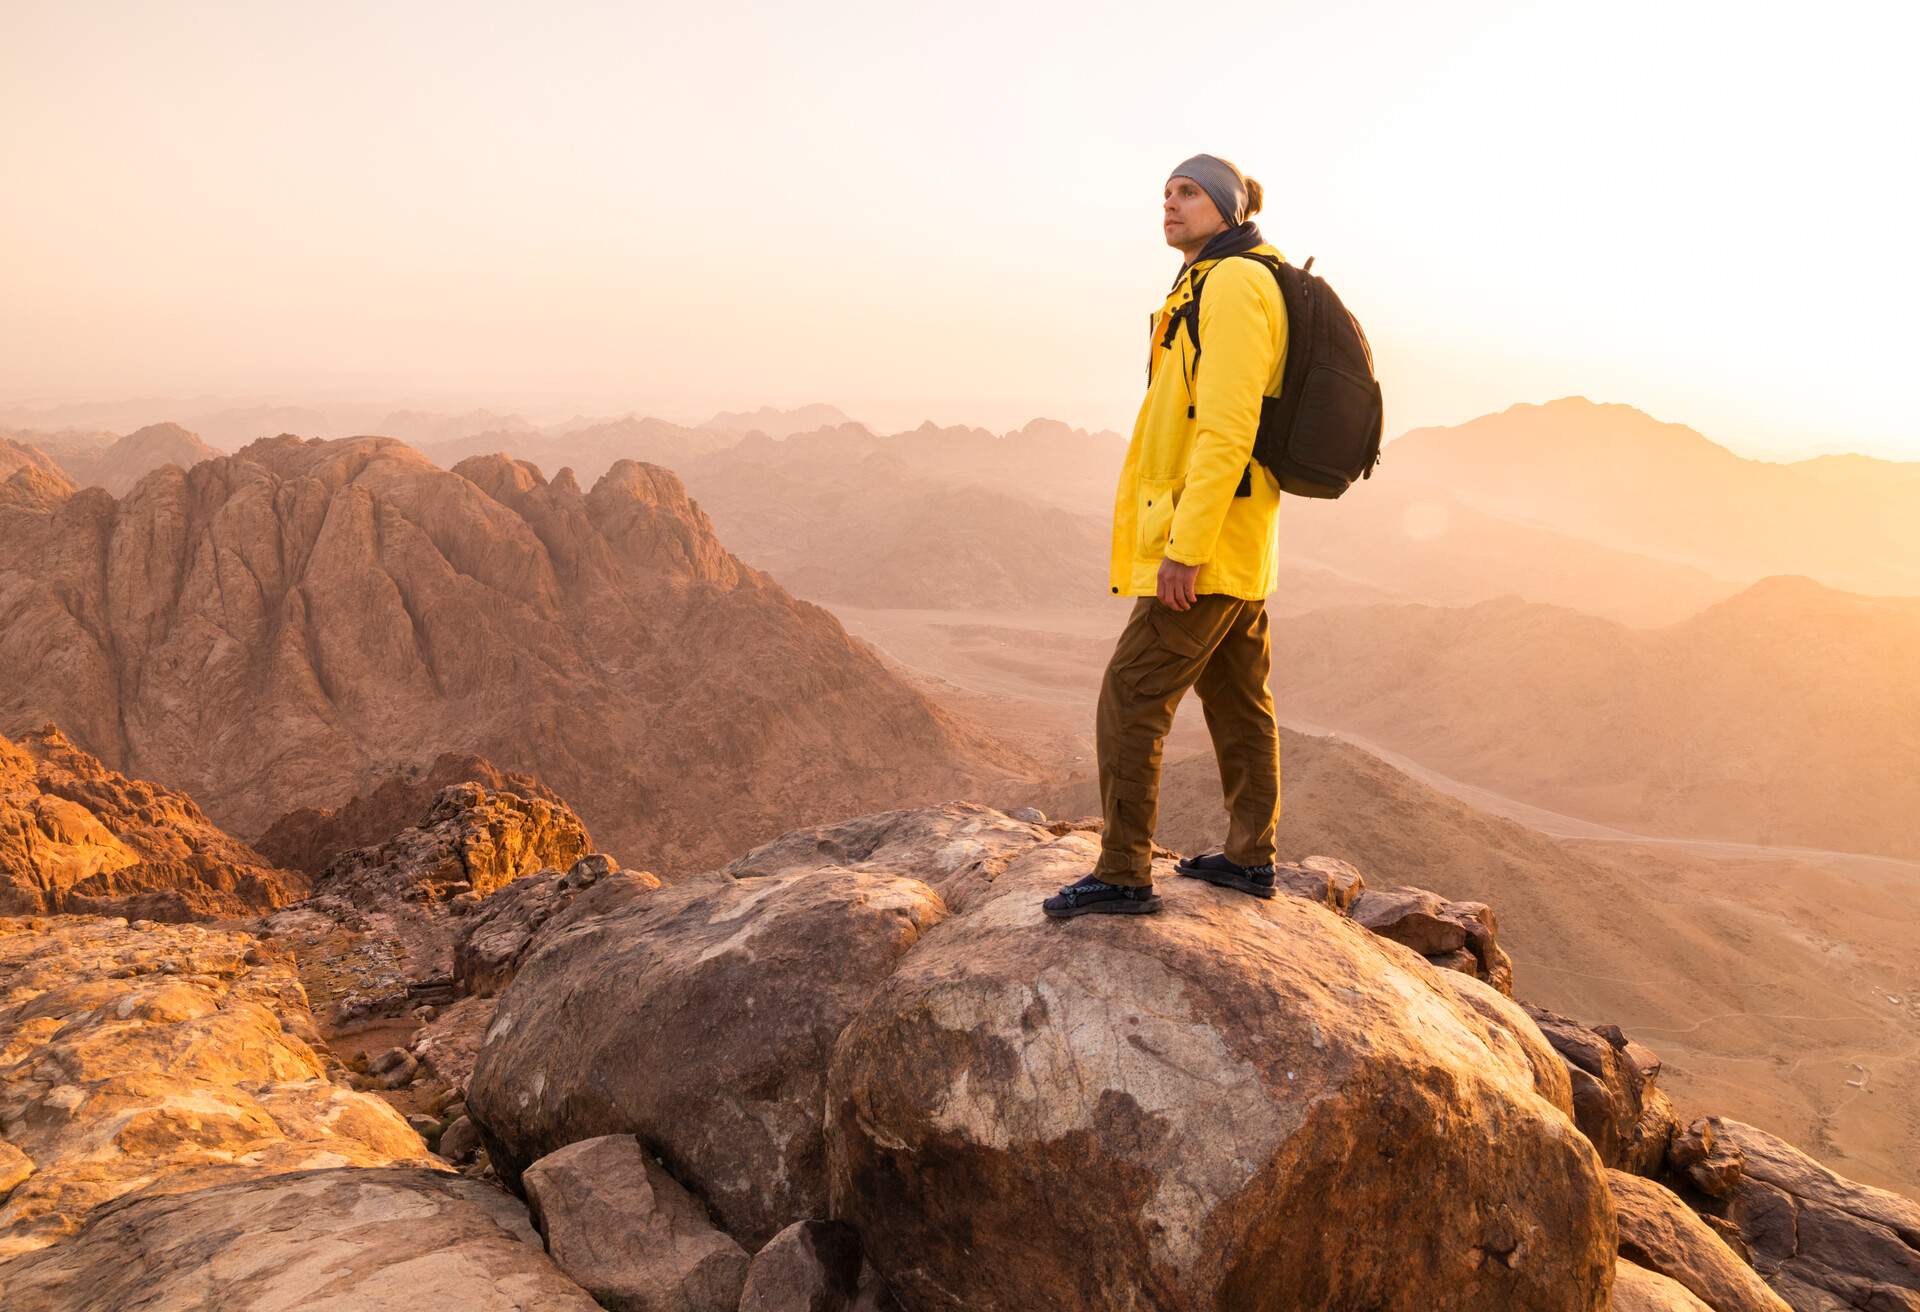 A male hiker stands tall on a rock boulder atop Mount Sinai.